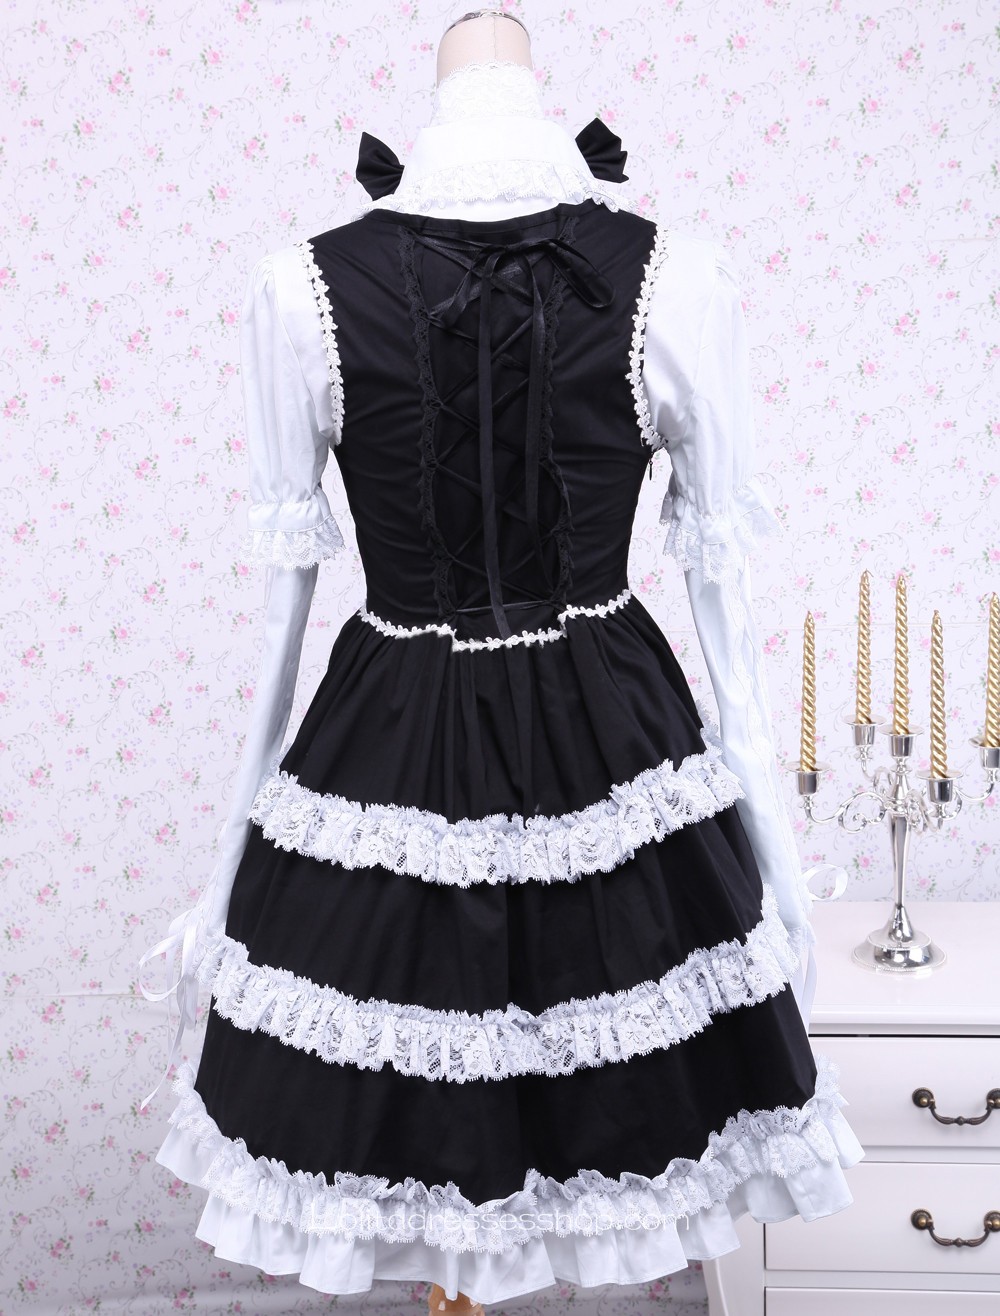 Black and White Cotton Long Sleeves Lace Trim Bow Gothic Lolita Dress